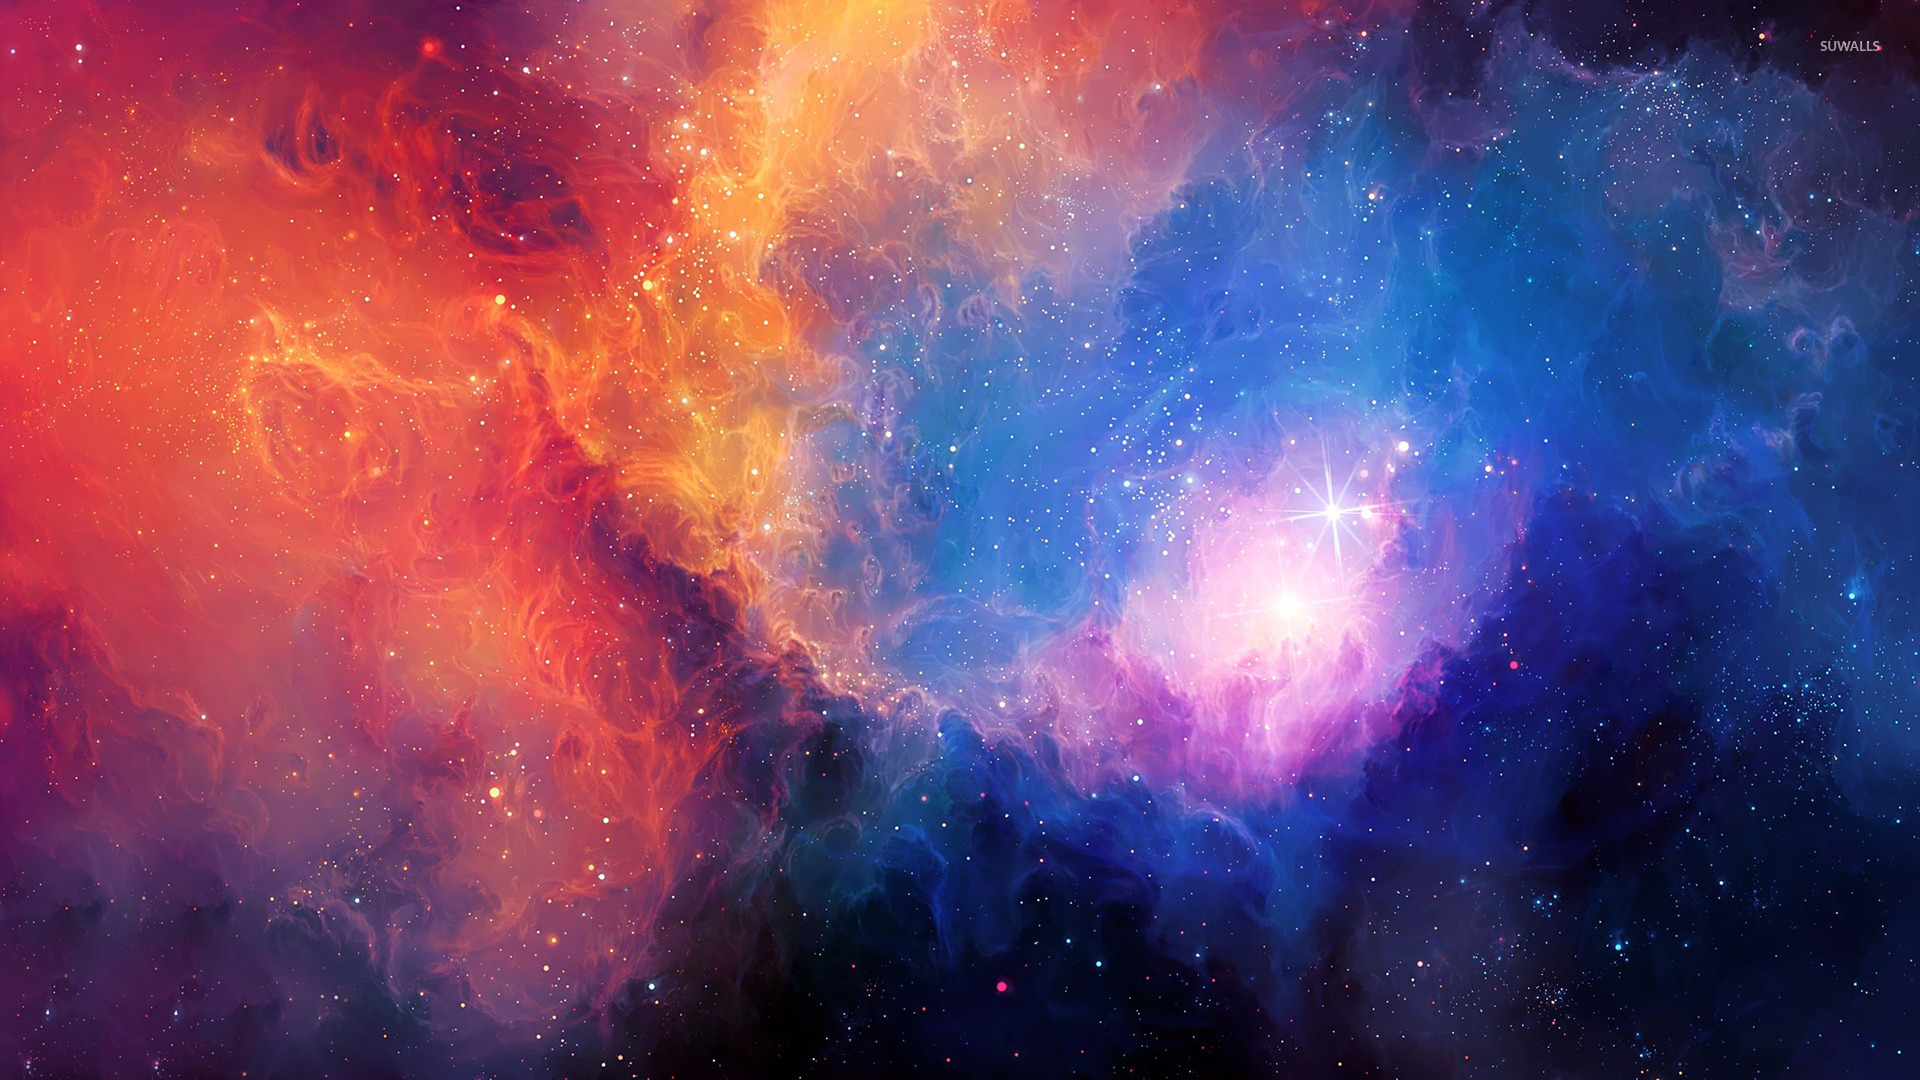 Colorful nebula wallpaper - Space wallpapers - #21963